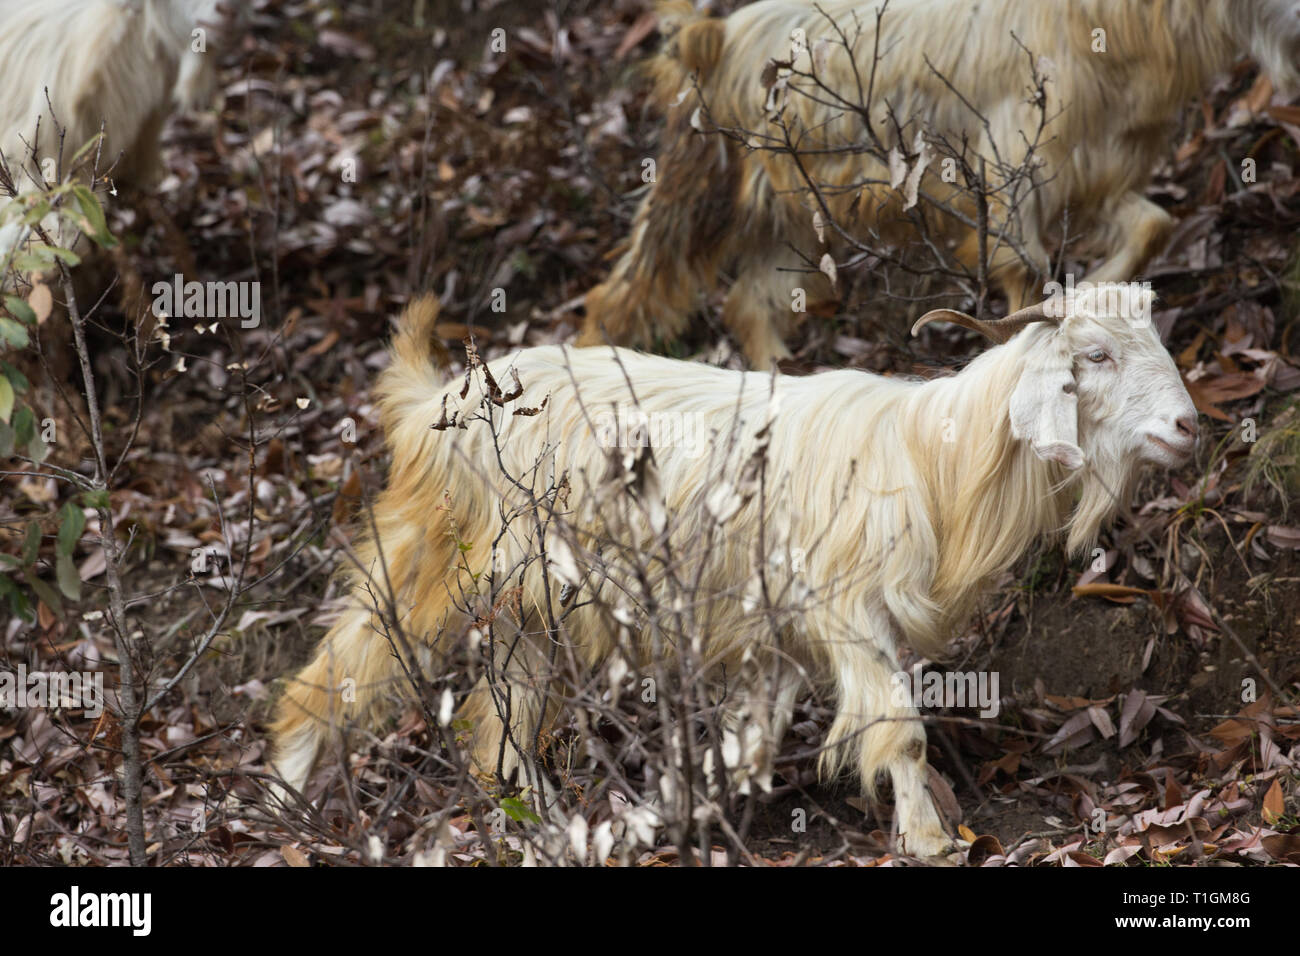 Domestic Goat  (Capra hircus). A mountain breed, one of a herd, a horned animal, trying its best to find some green vegetation on which to browse. Stock Photo